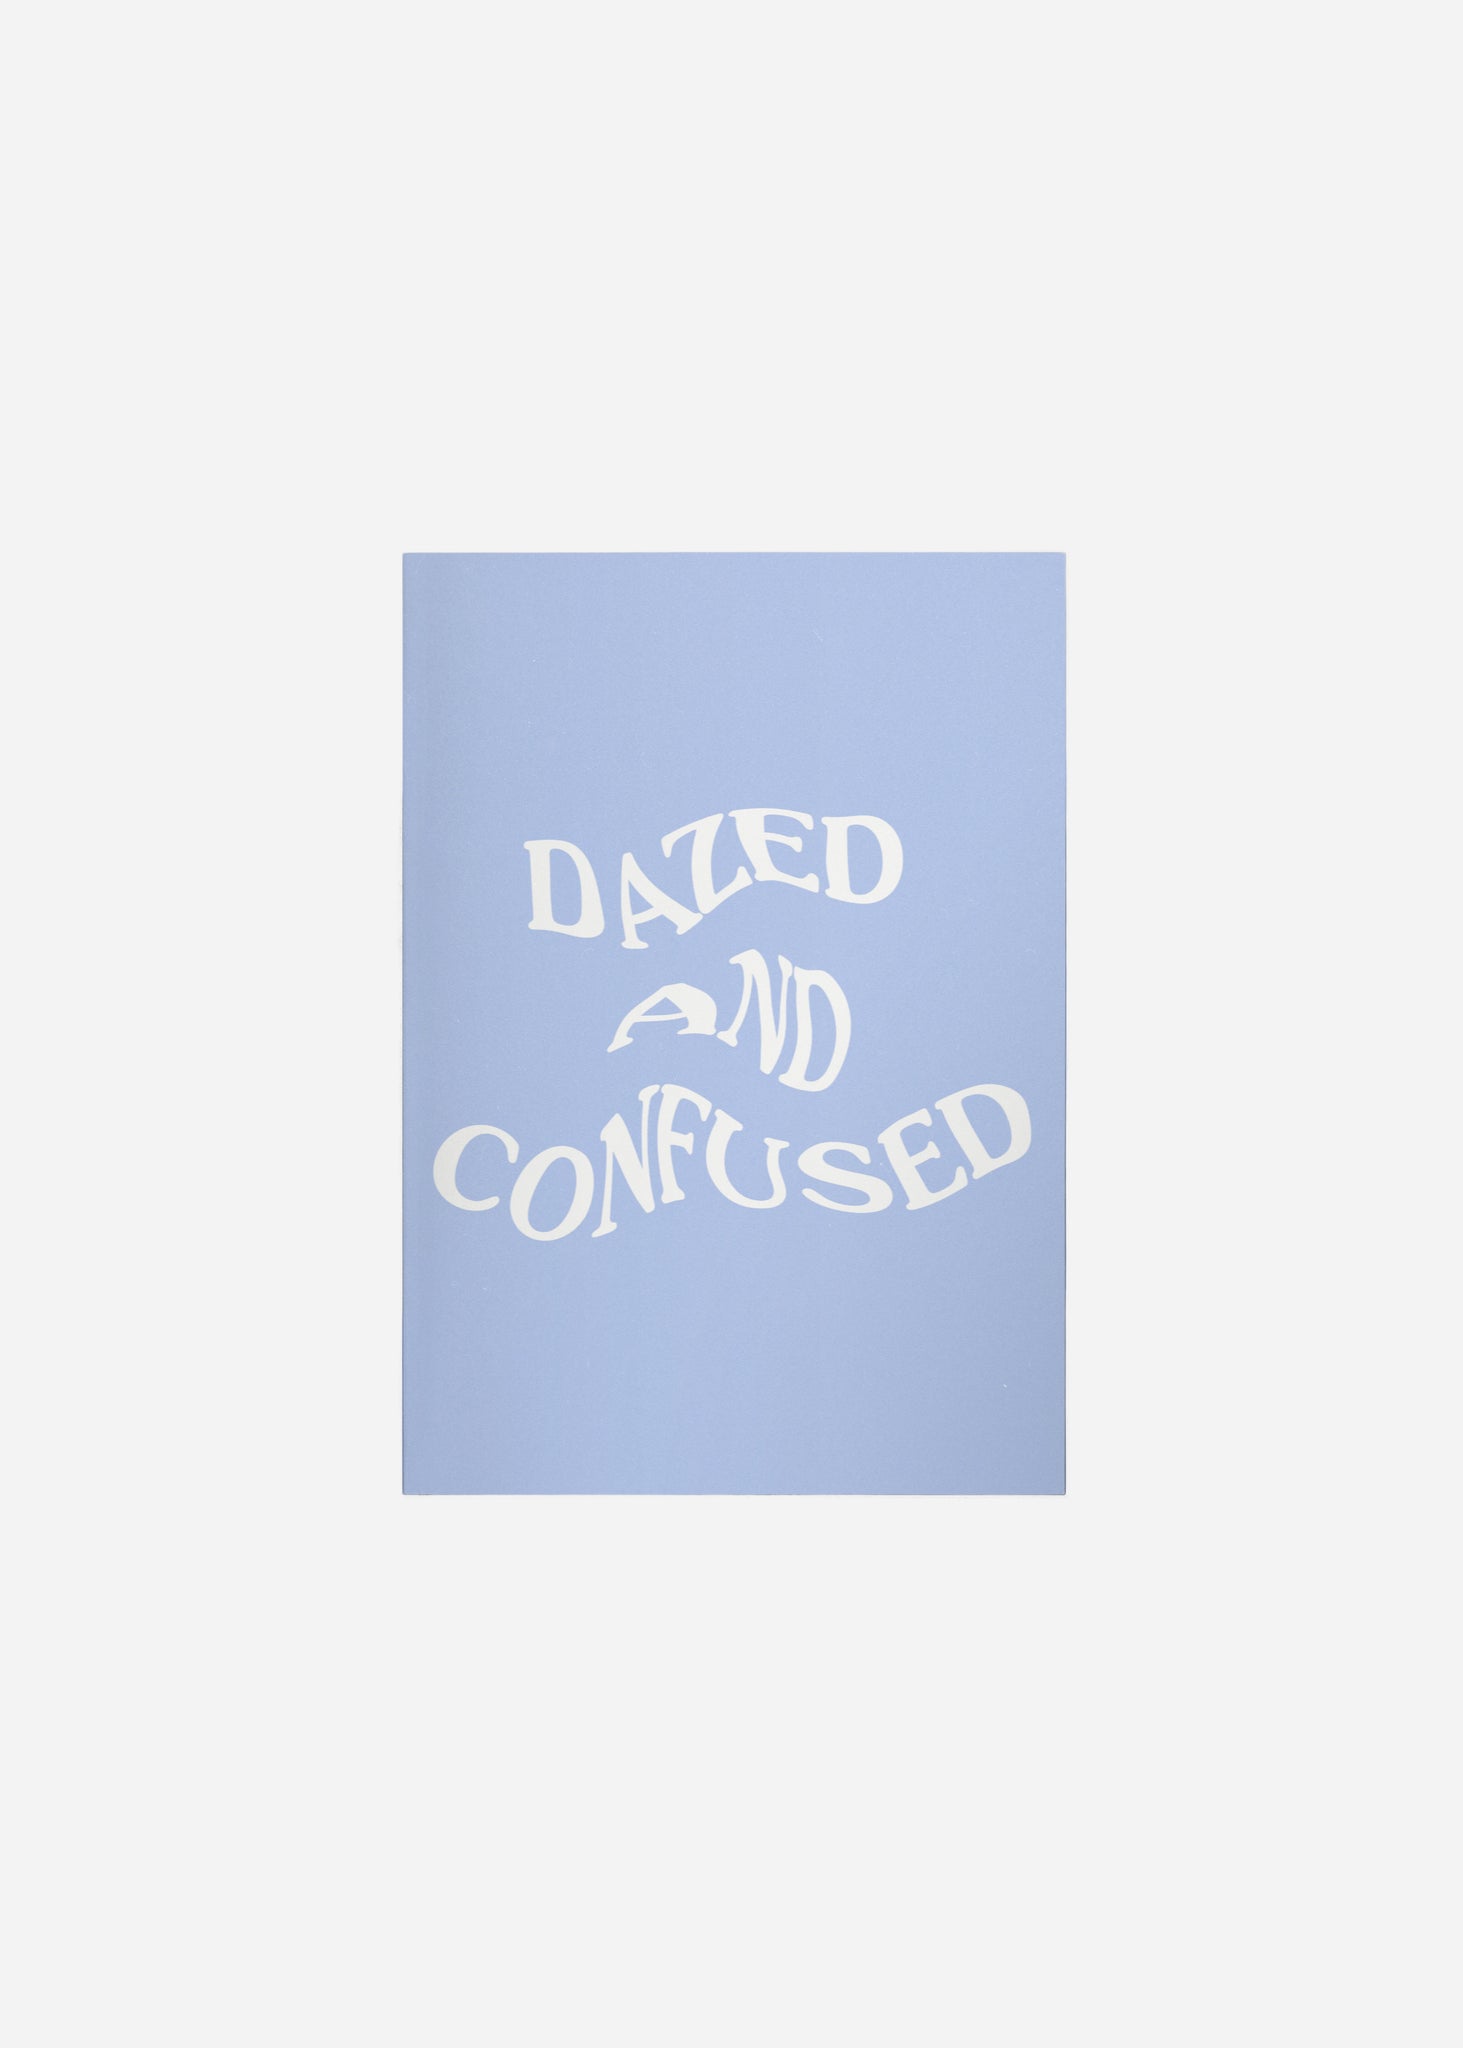 dazed and confused Fine Art Print